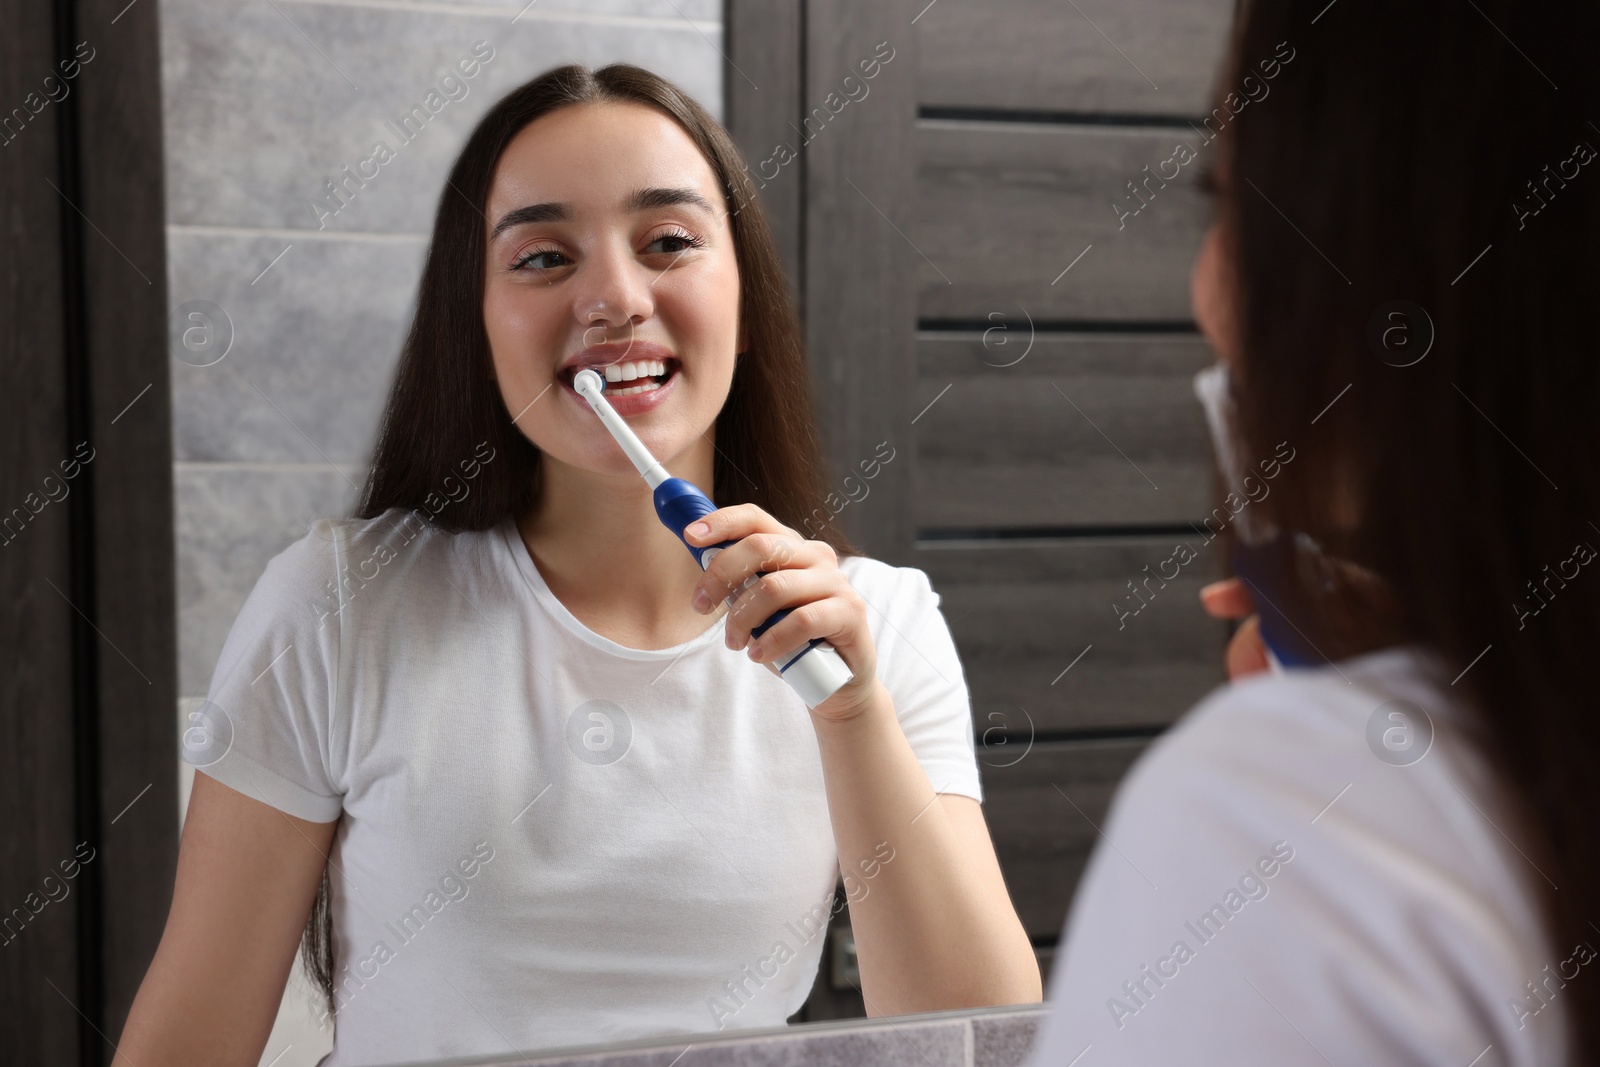 Photo of Young woman brushing her teeth with electric toothbrush near mirror in bathroom